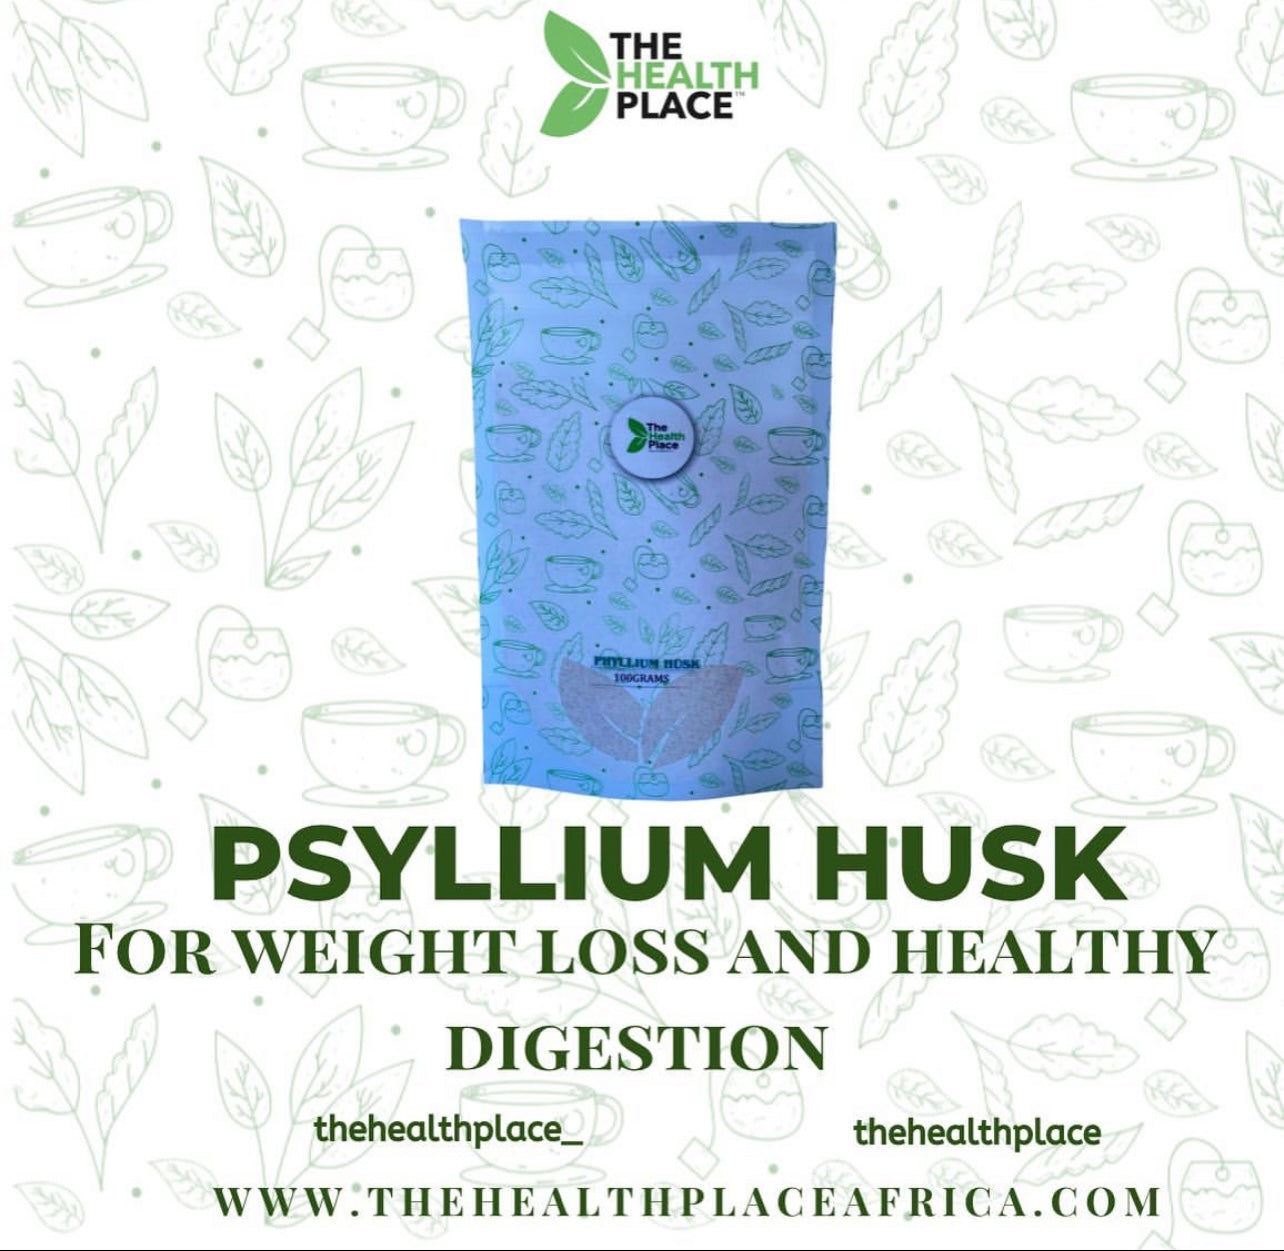 PSYLLIUM HUSK FOR WEIGHT LOSS AND HEALTHY DIGESTION